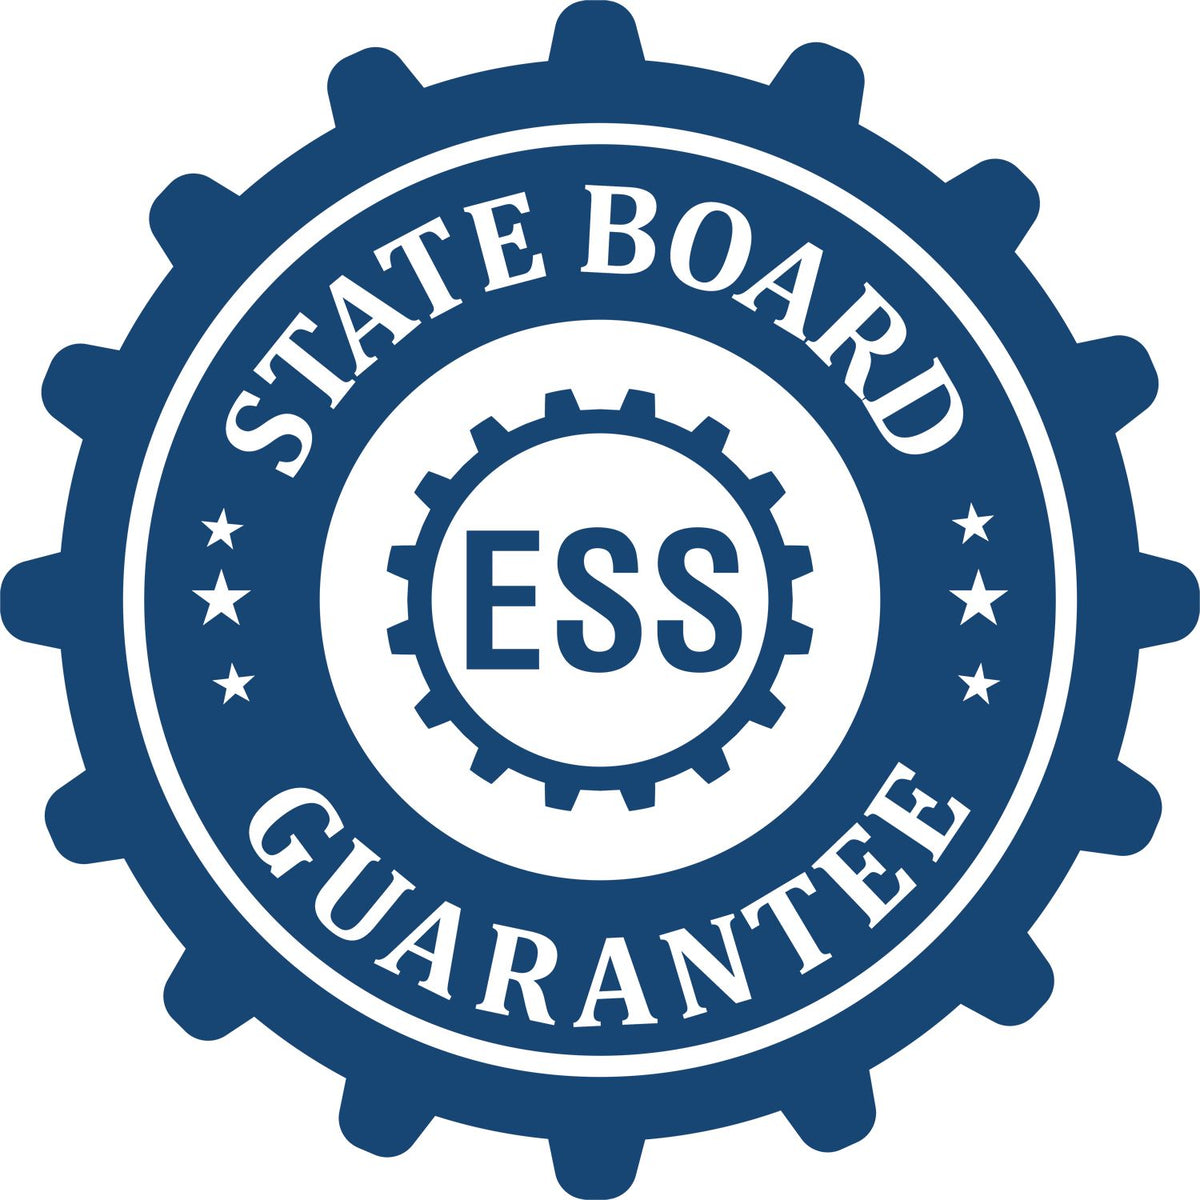 An emblem in a gear shape illustrating a state board guarantee for the State of Hawaii Long Reach Architectural Embossing Seal product.